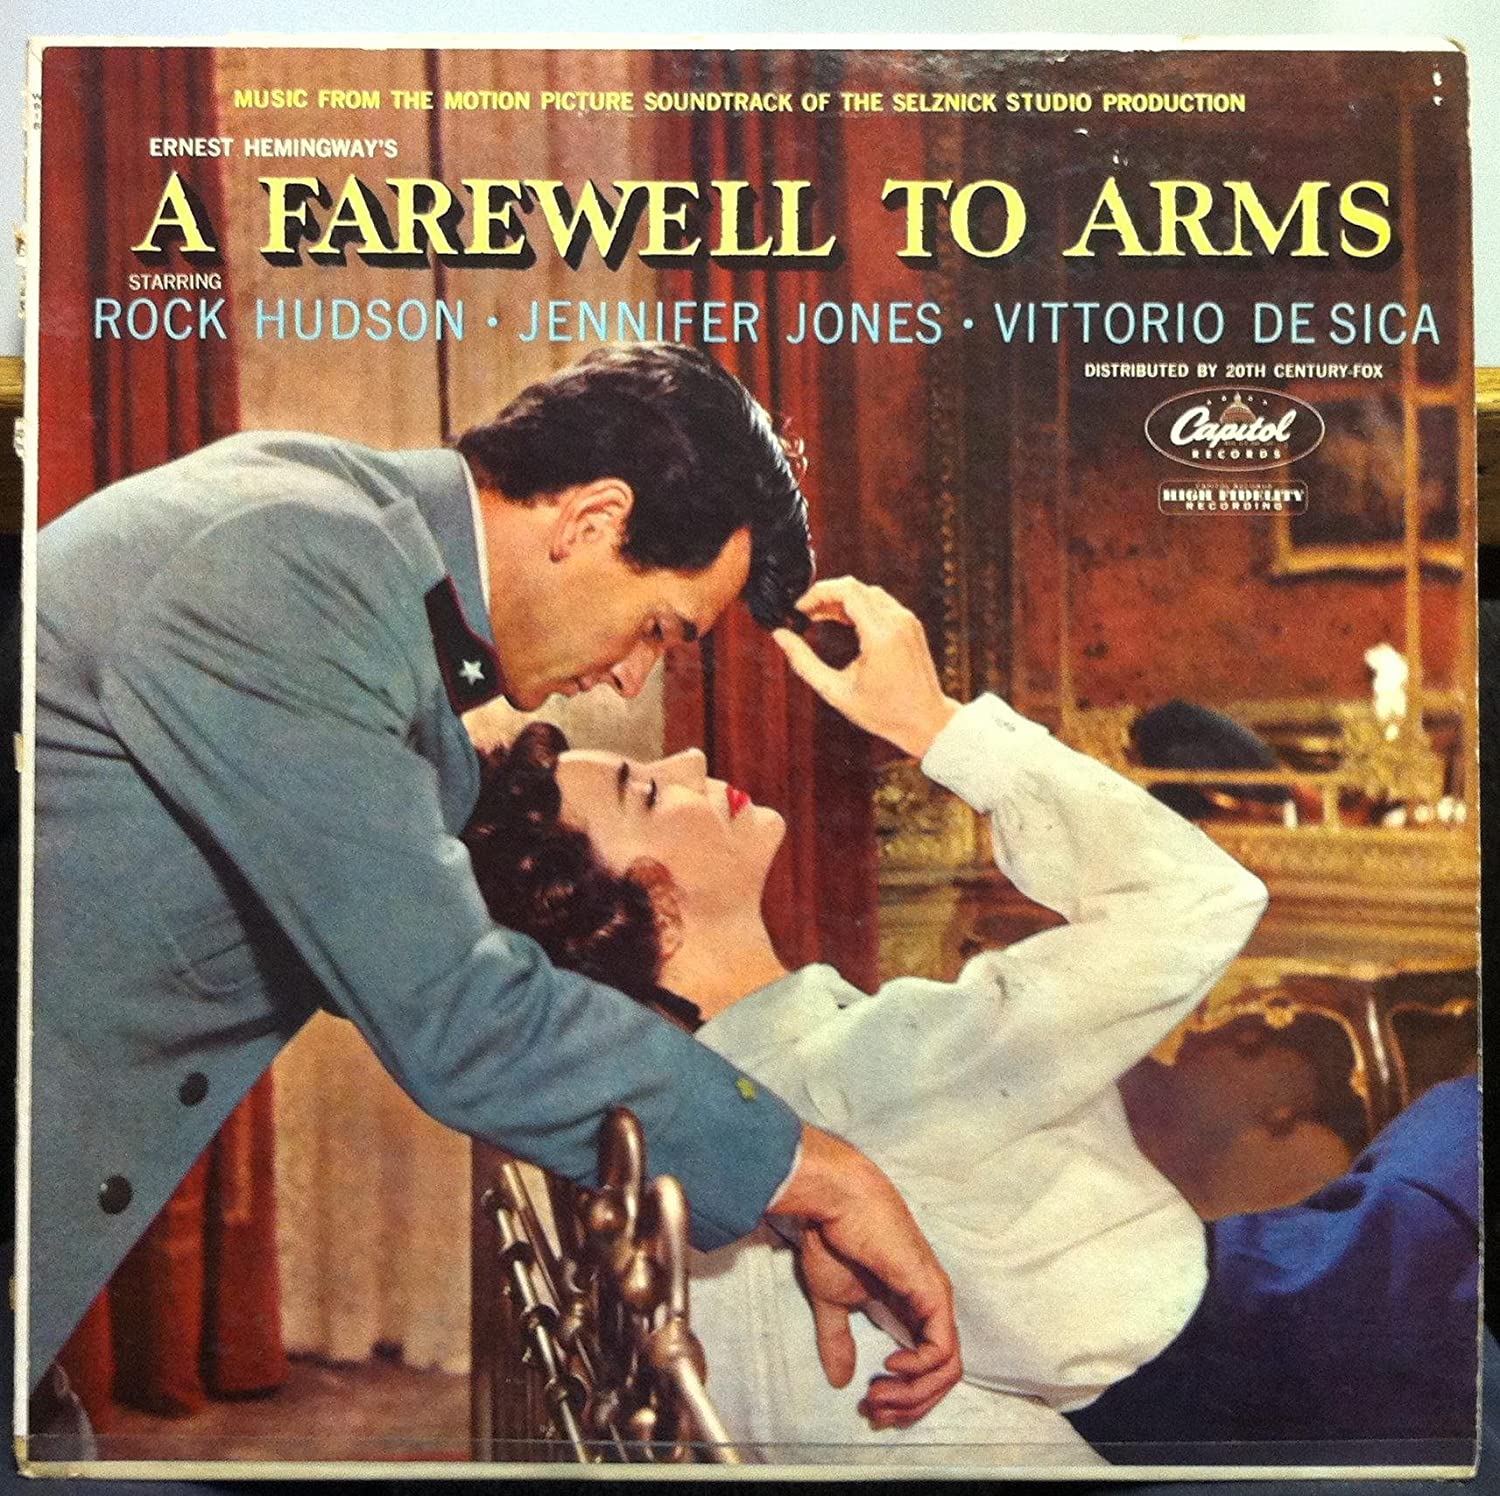 A Farewell To Arms - Music From The Motion Picture Soundtrack Of The Selznick Studio Production